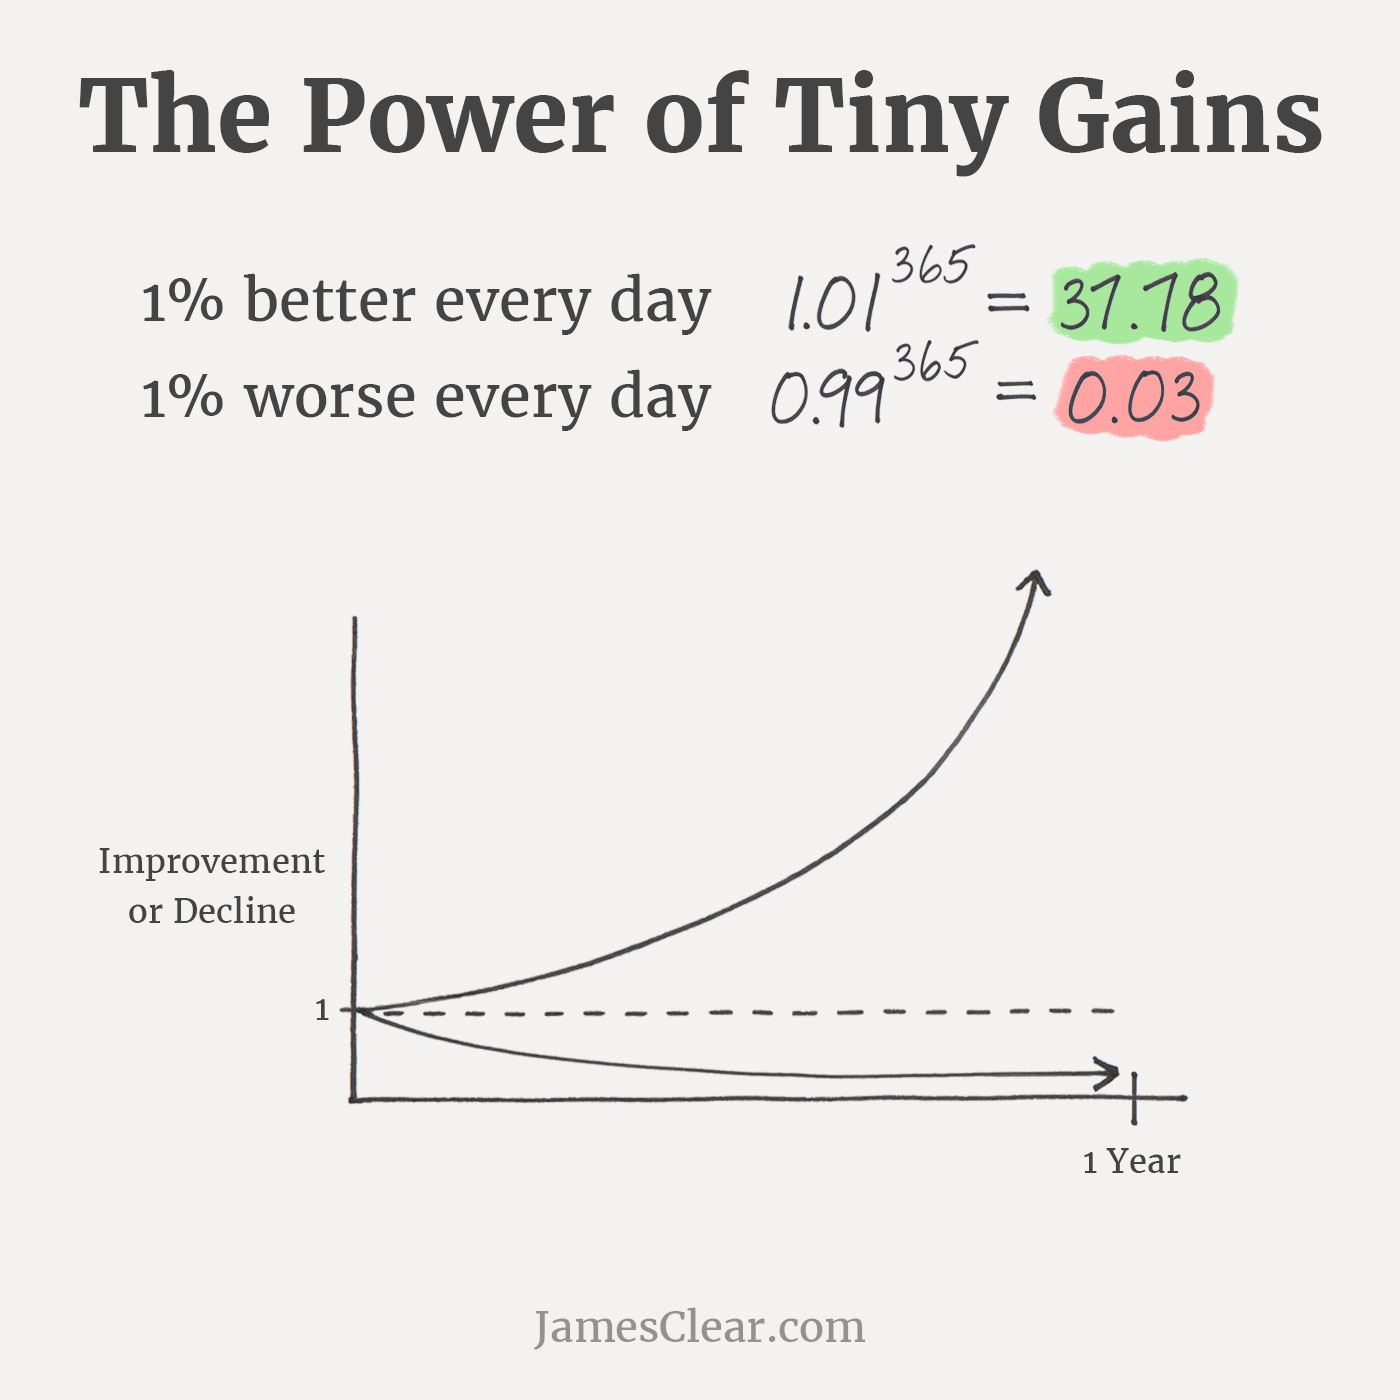 The aggregation of marginal gains shows how small improvements and one percent gains compound. 